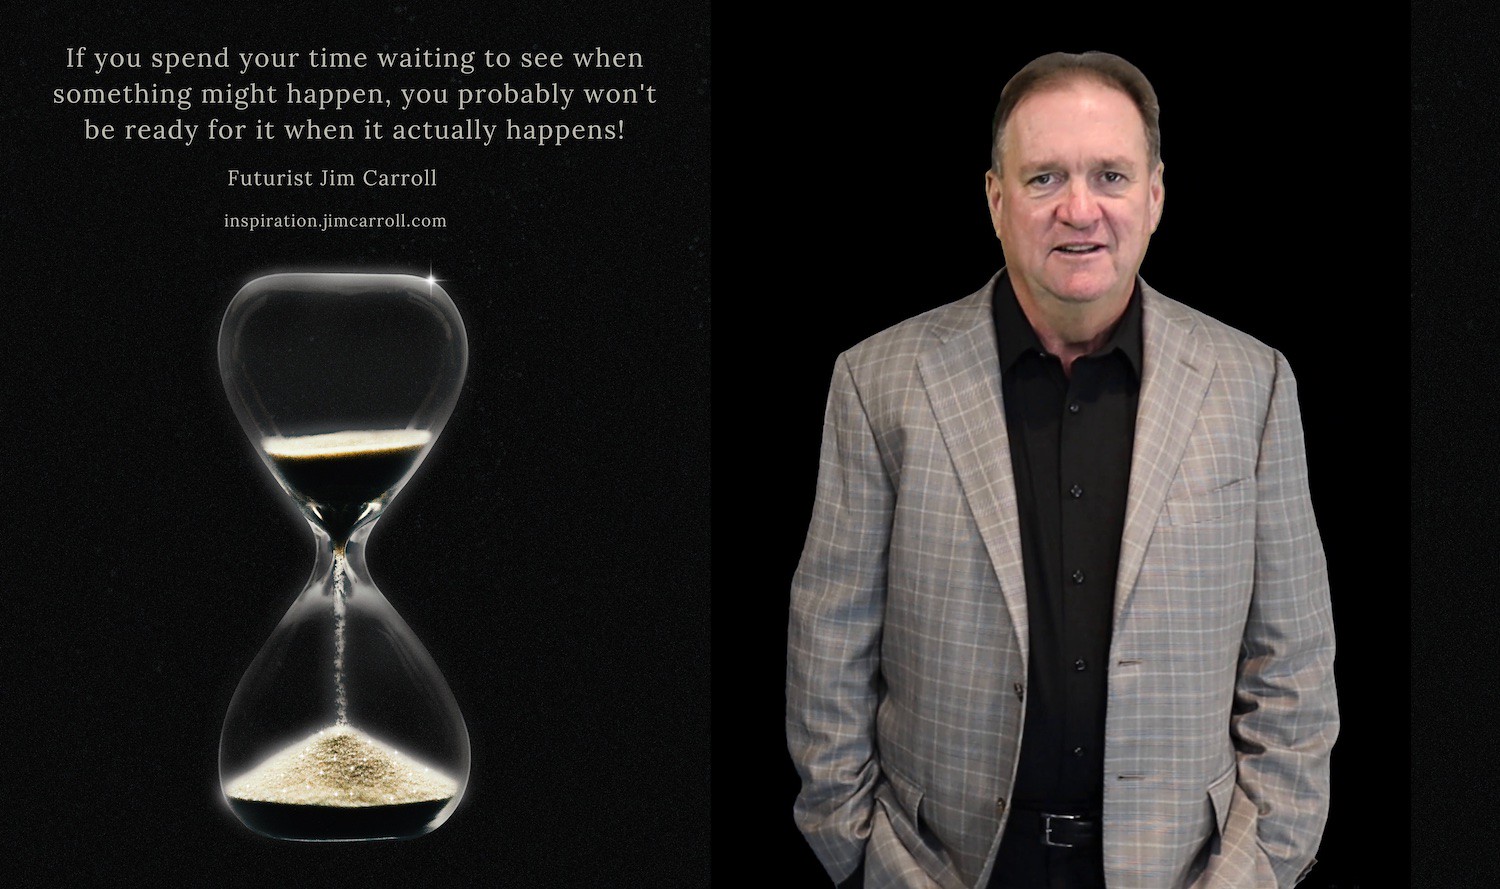 "If you spend your time waiting to see when something might happen, you probably won't be ready for it when it actually happens!" - Futurist Jim Carroll